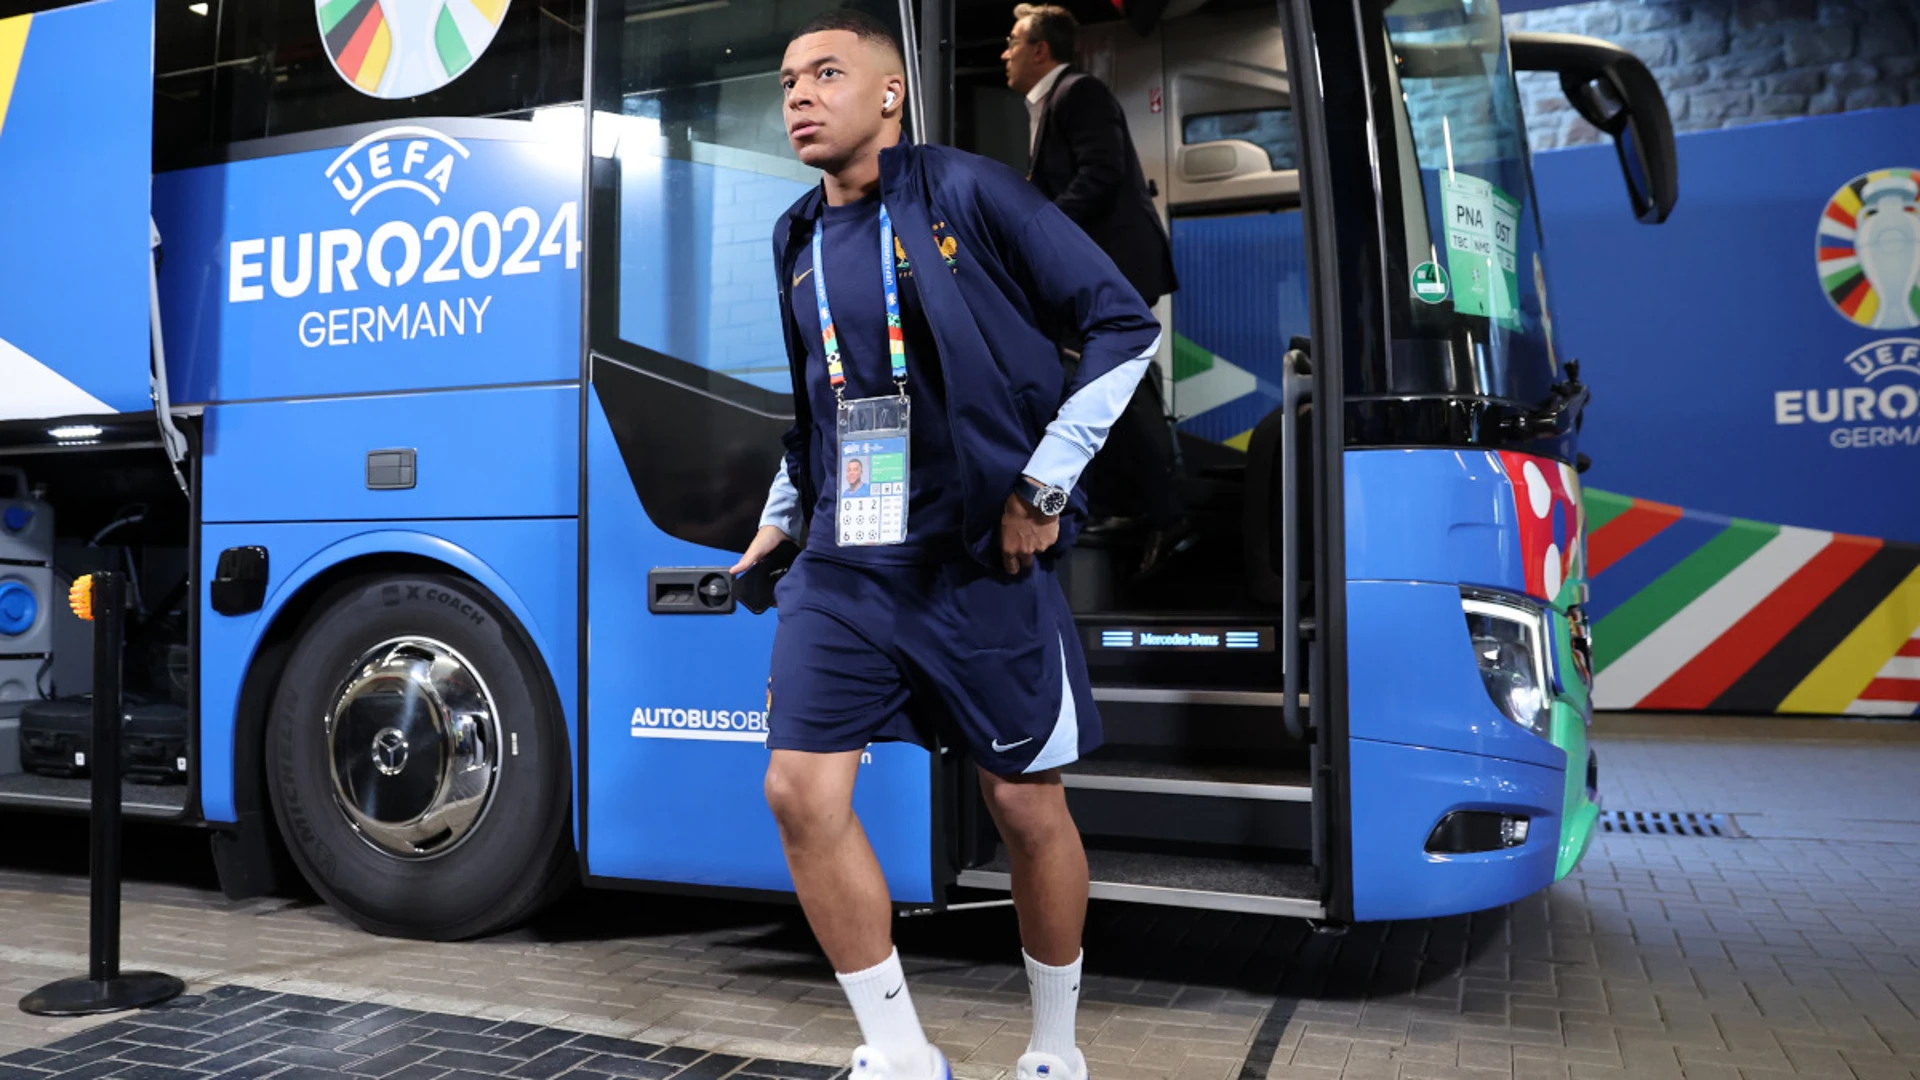 Mbappe starts for France against Poland at Euro 2024 after injury